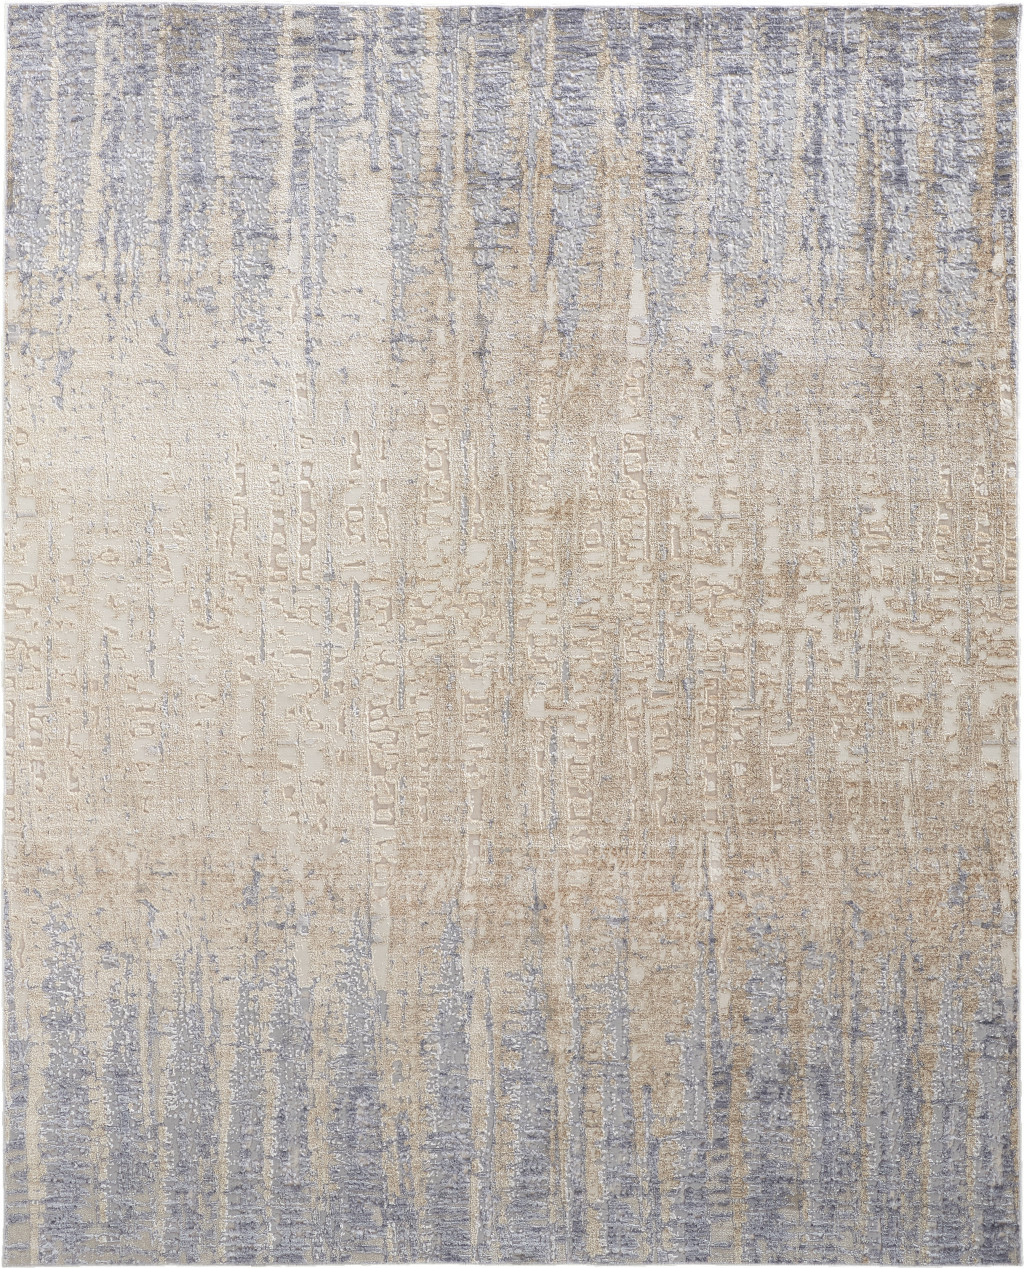 2' X 3' Tan Brown And Blue Abstract Power Loom Distressed Area Rug-514193-1